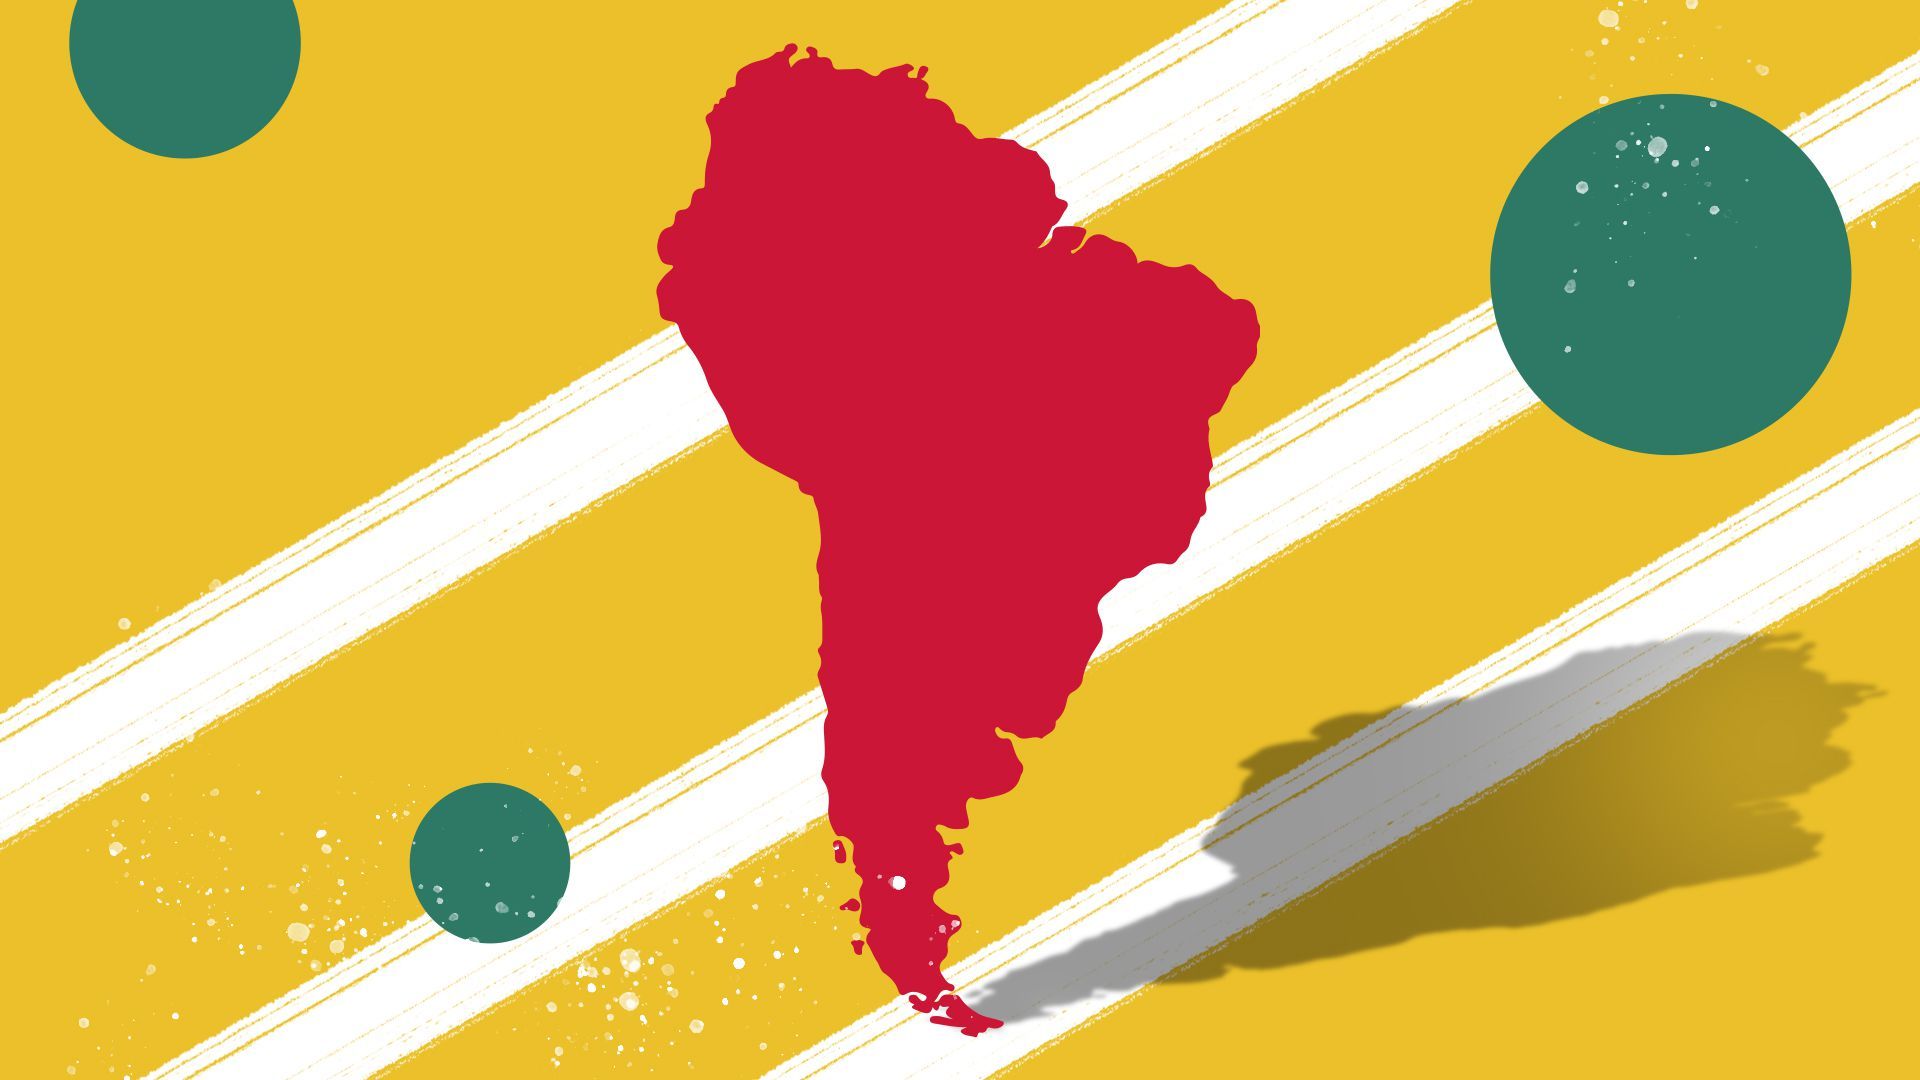 Illustration of South America with abstract shapes.